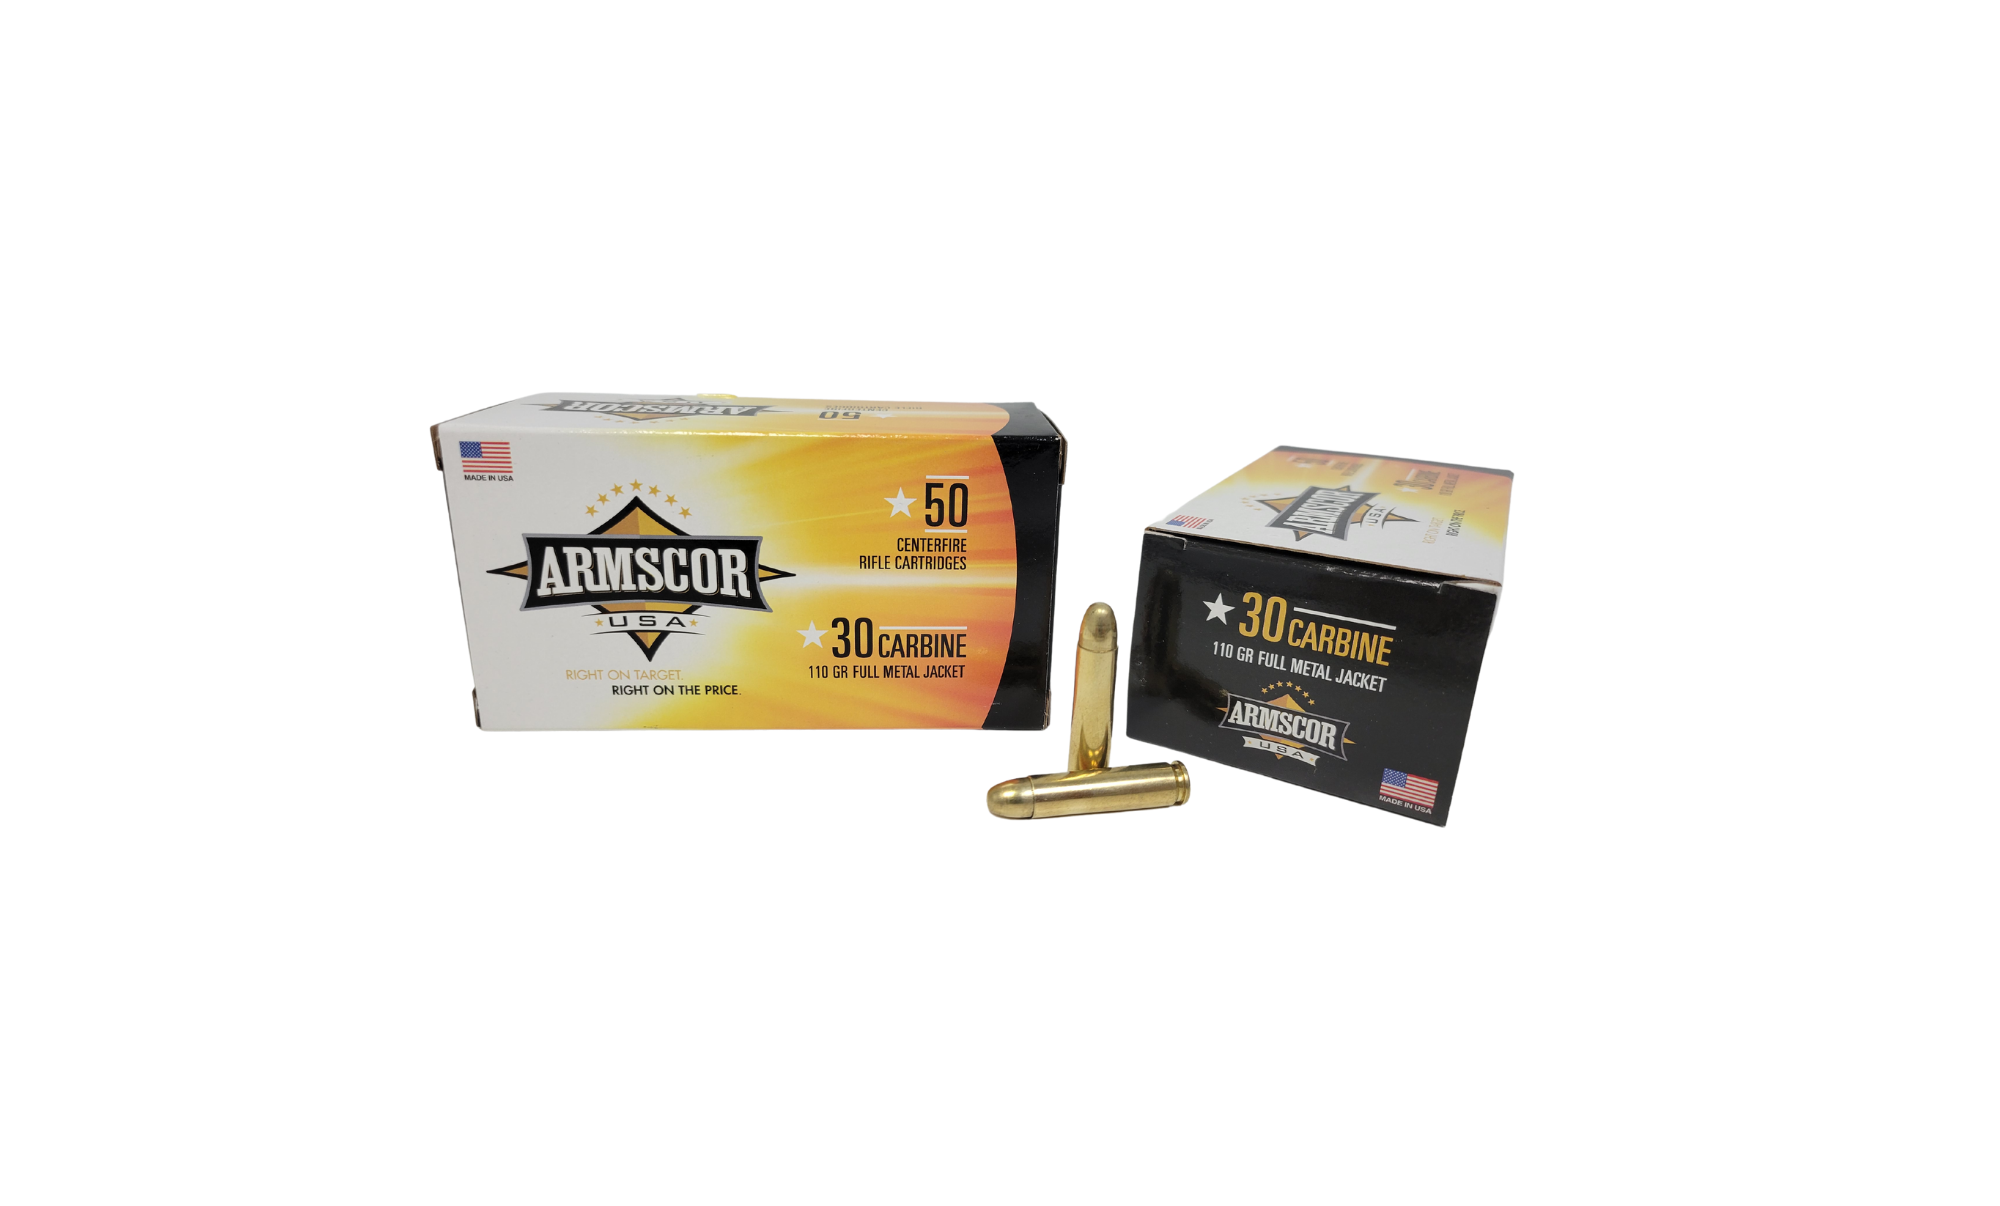 Remington 30-06 CORE-LOKT SAME DAY SHIPPING 180 Grain PSP – 20 Rounds (Box) [NO TAX outside Texas] Product Image